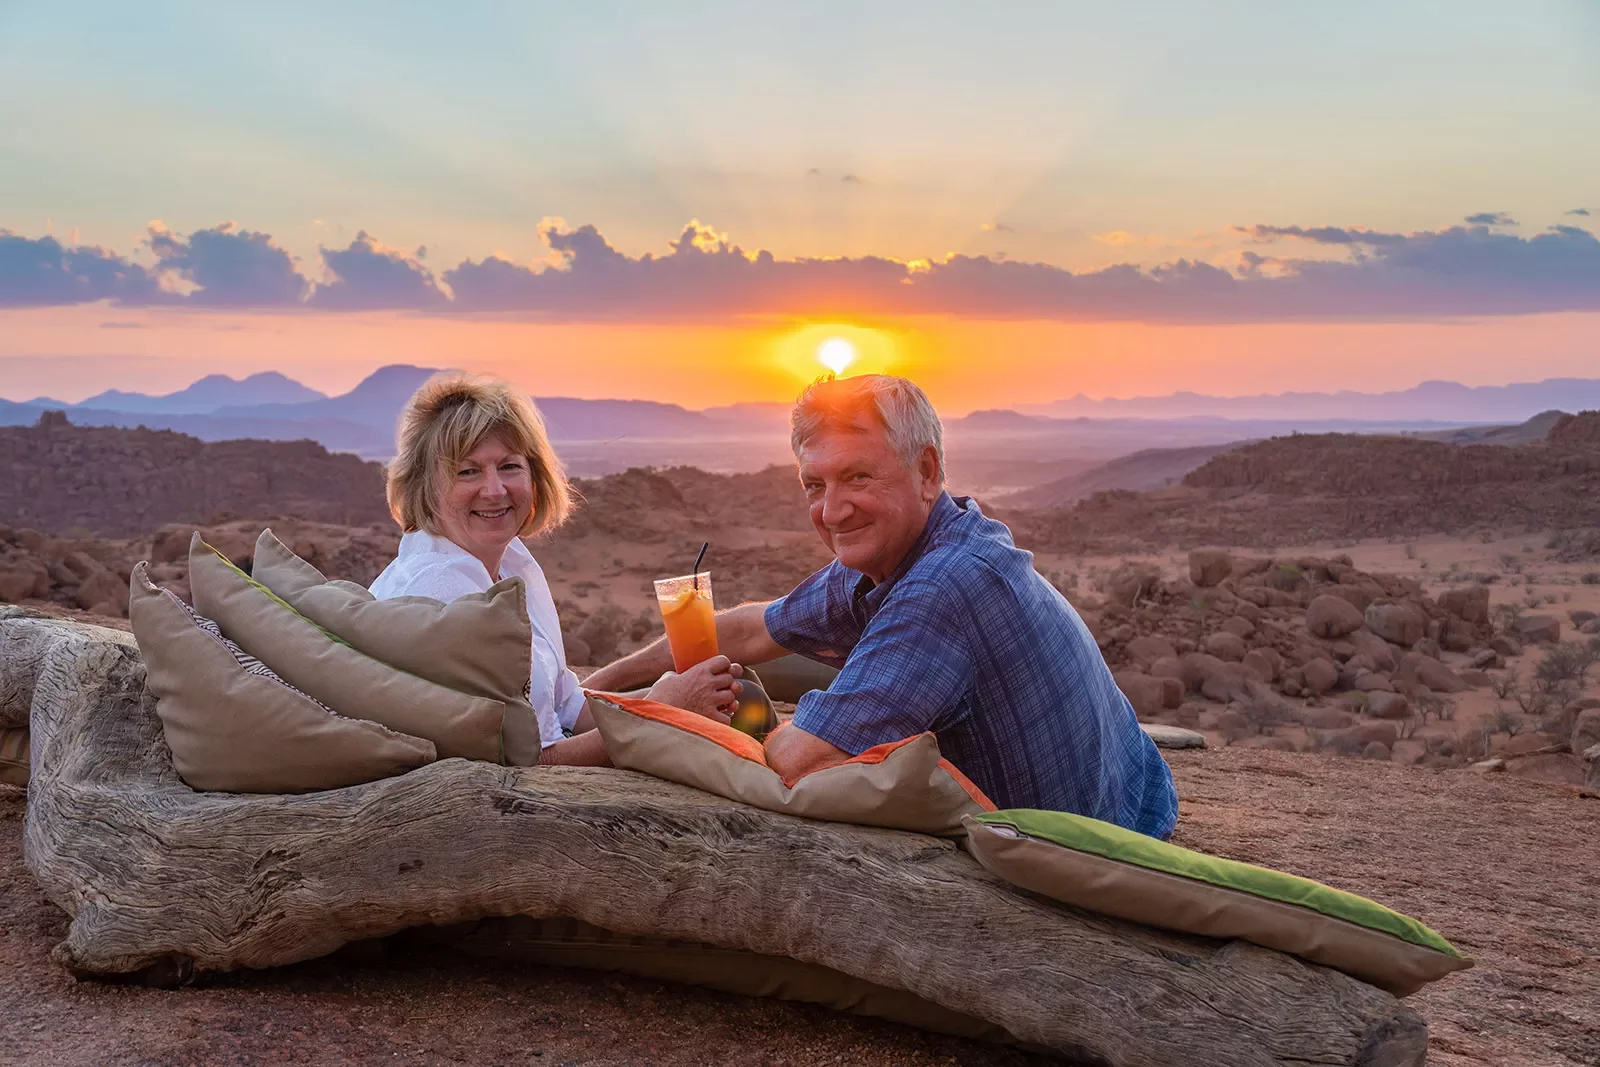 A couple leaning against pillows against a fallen tree, enjoying the sunset